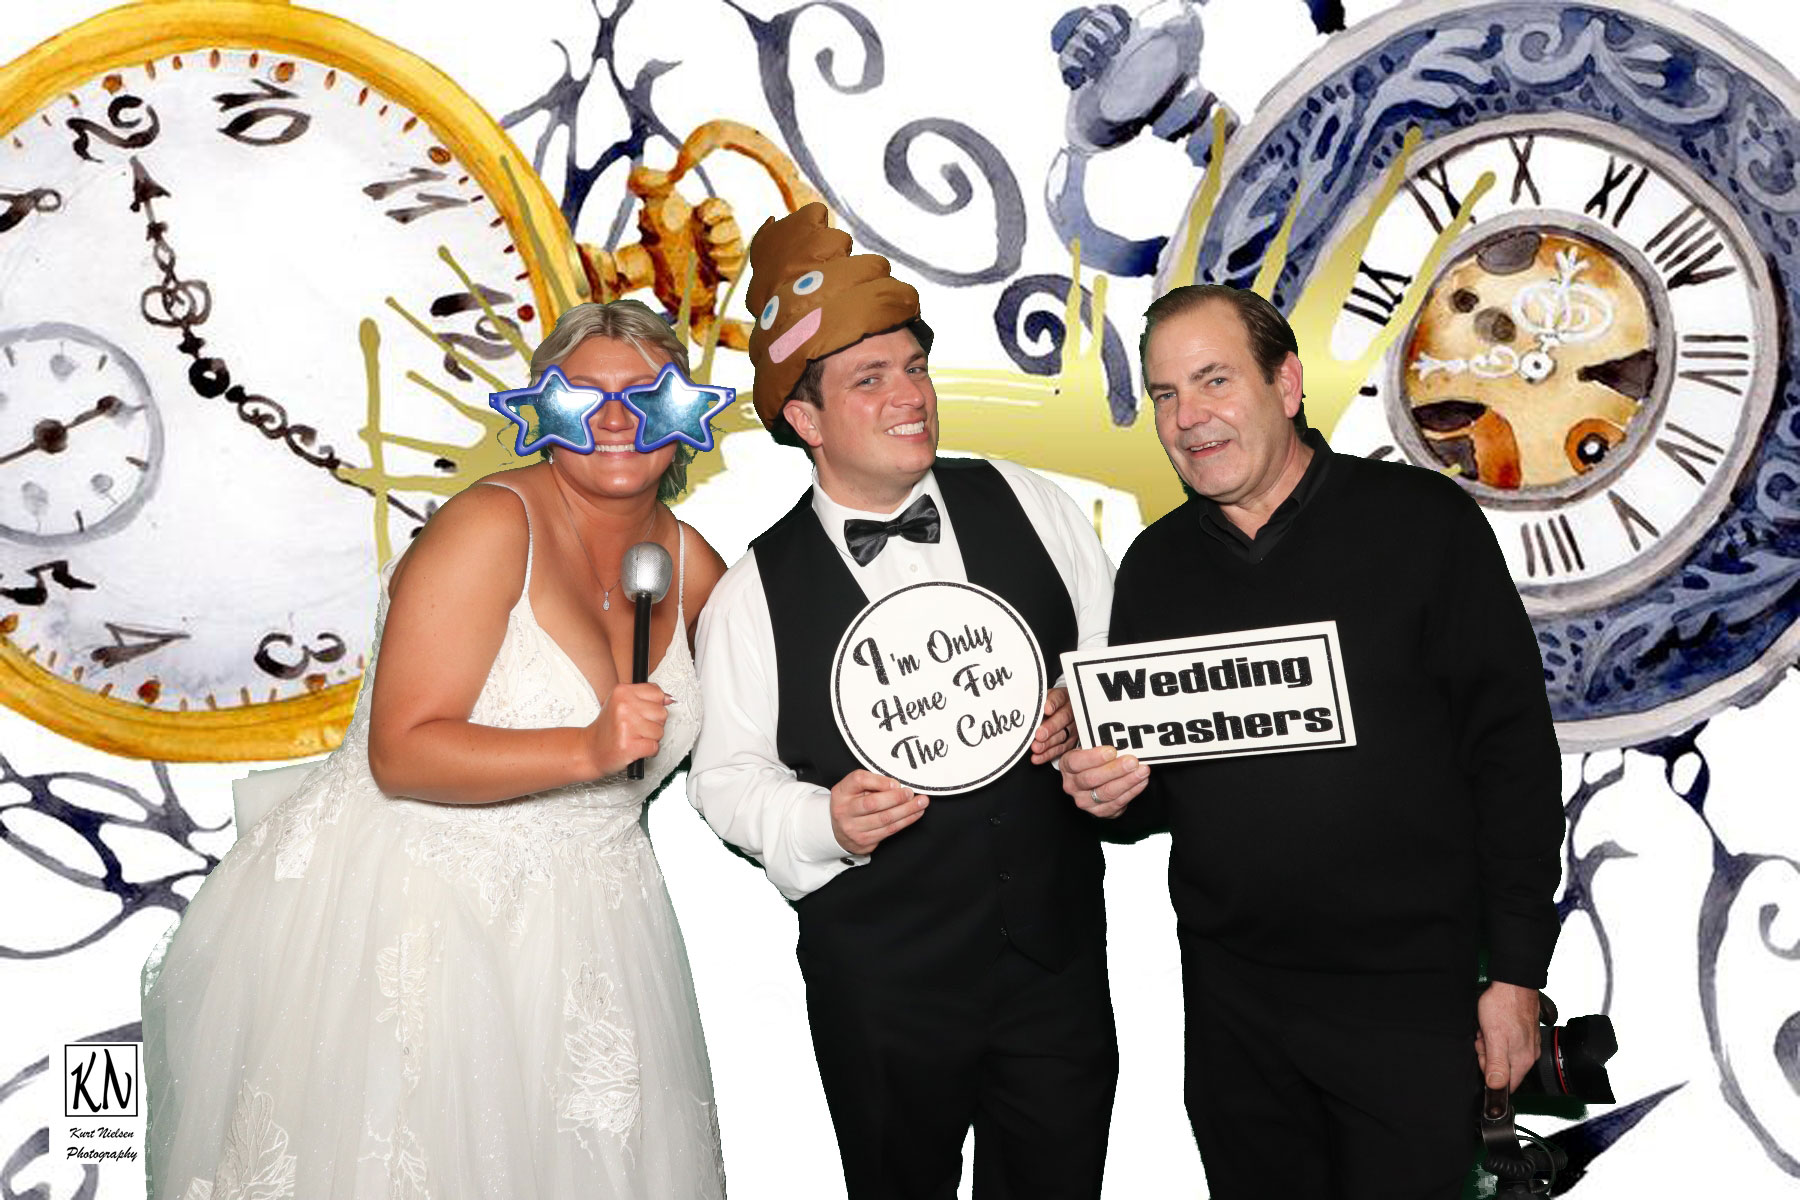 New Year's Eve wedding photo booth with real life wedding crashers at the Hilton Garden Inn Toledo Downtown